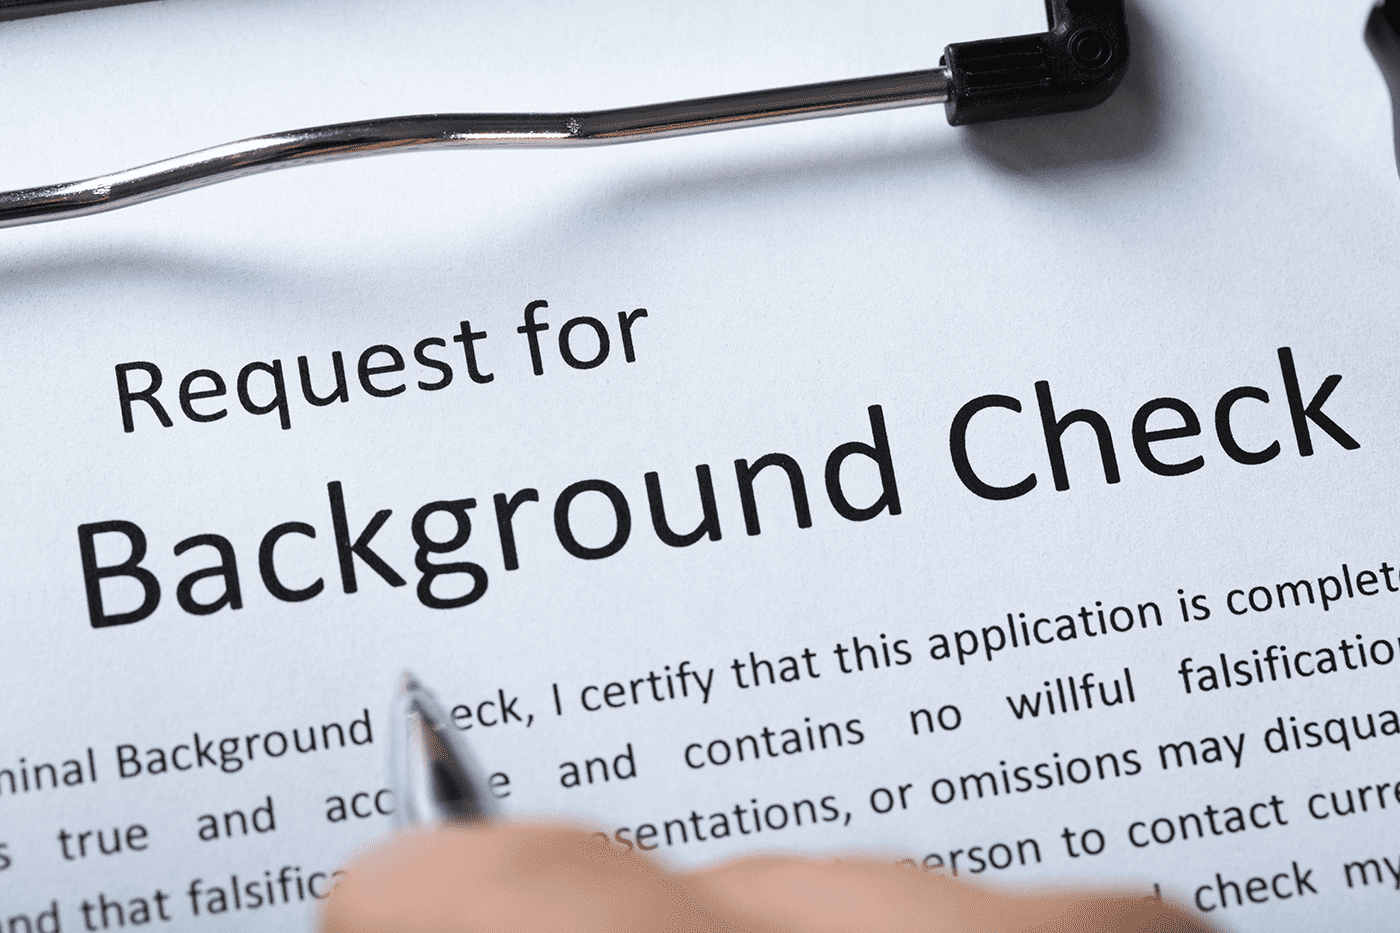 What You Should Know About FINRA’s Background Check Requirements